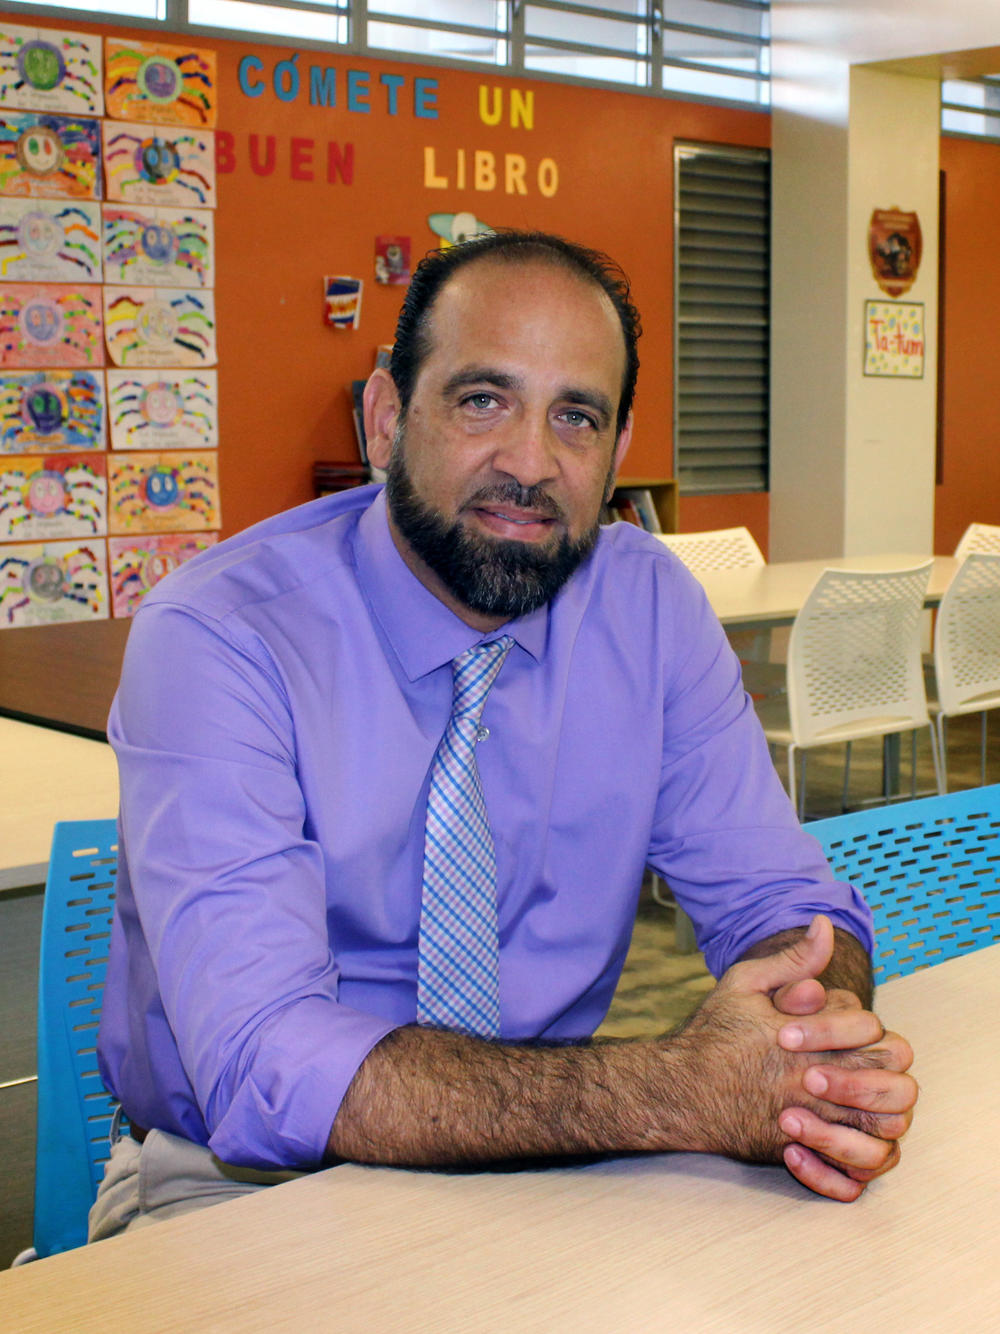 Principal Jorge Luis Colón González leads Deishangelxa's school, El Coquí, where a new, federally funded after-school tutoring program aims to help students recover from learning setbacks.